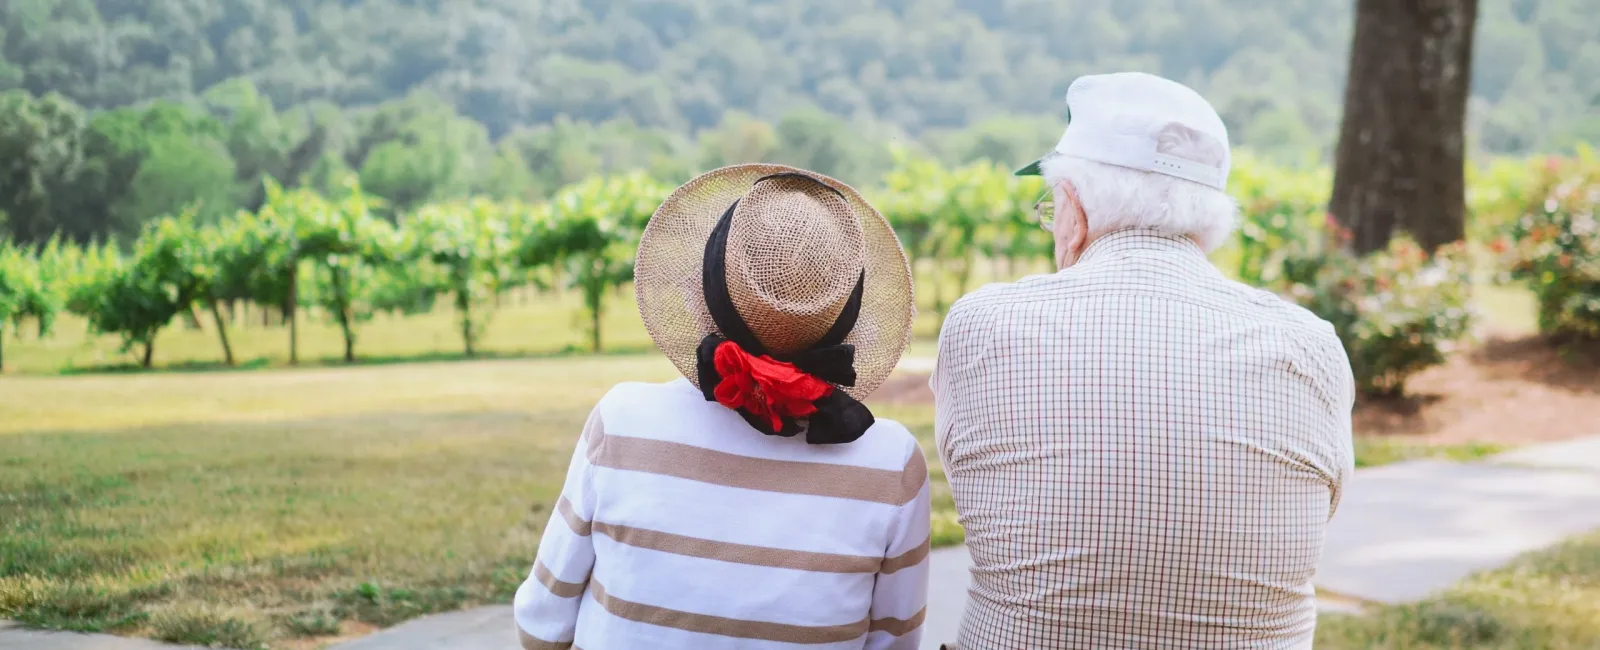 40 Heartwarming Activities to Share With a Parent Battling Dementia